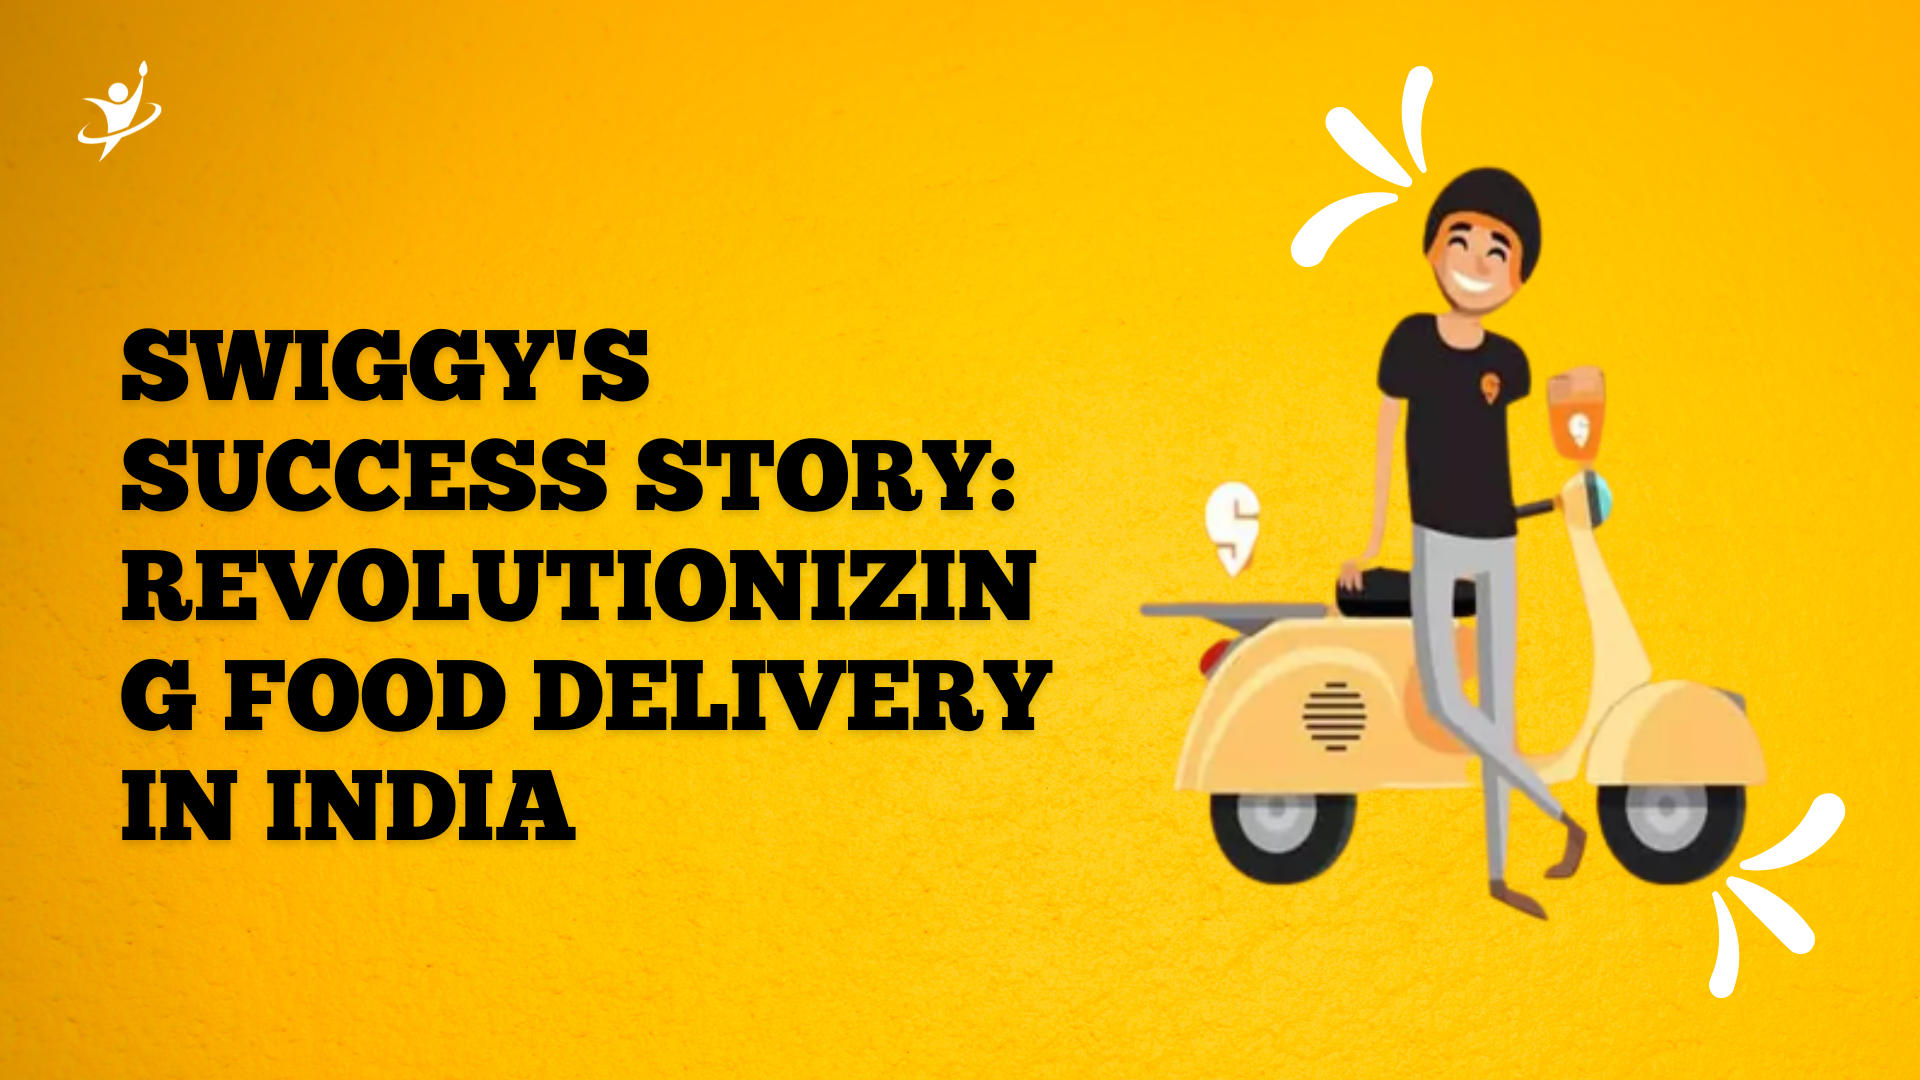 Swiggy's Success Story: Revolutionizing Food Delivery in India